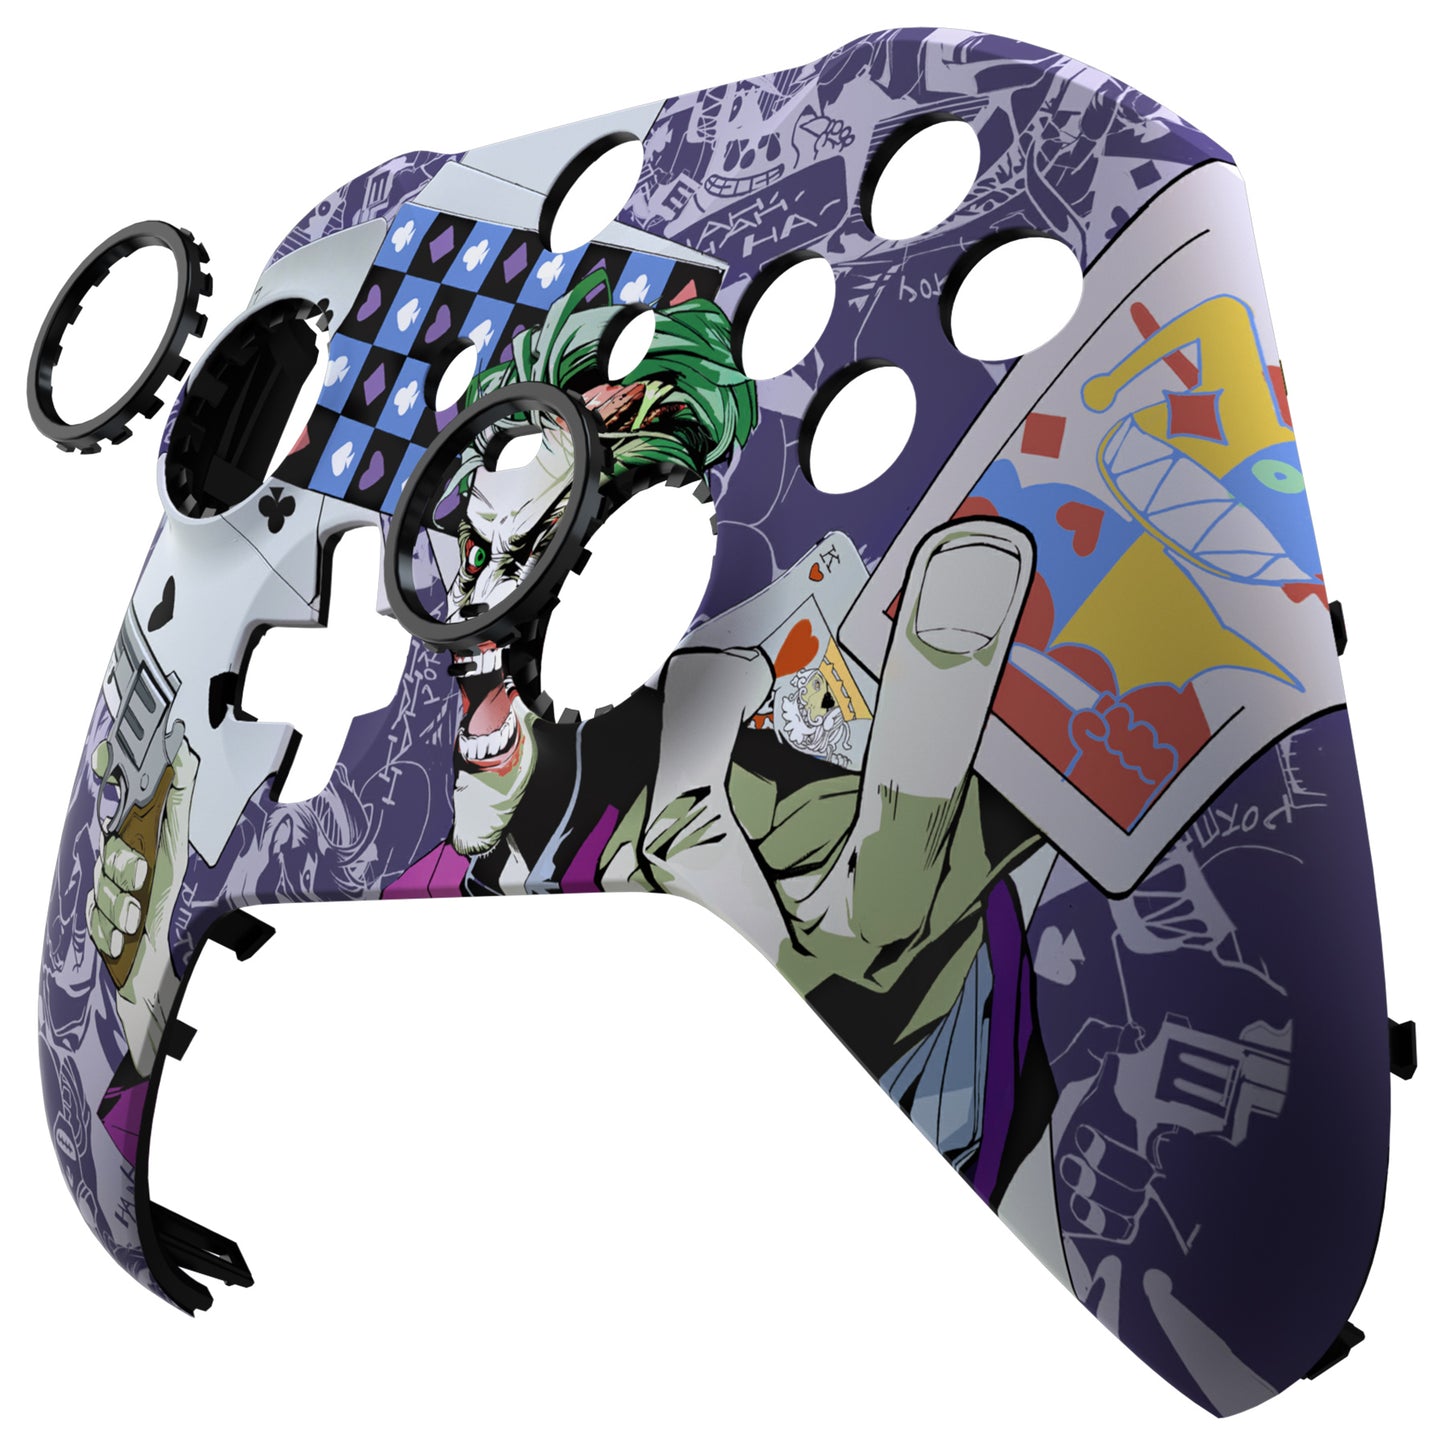 eXtremeRate Retail Clown Cards Style Faceplate Cover, Soft Touch Front Housing Shell Case Replacement Kit for Xbox One Elite Series 2 Controller Model 1797 - Thumbstick Accent Rings Included - ELT141